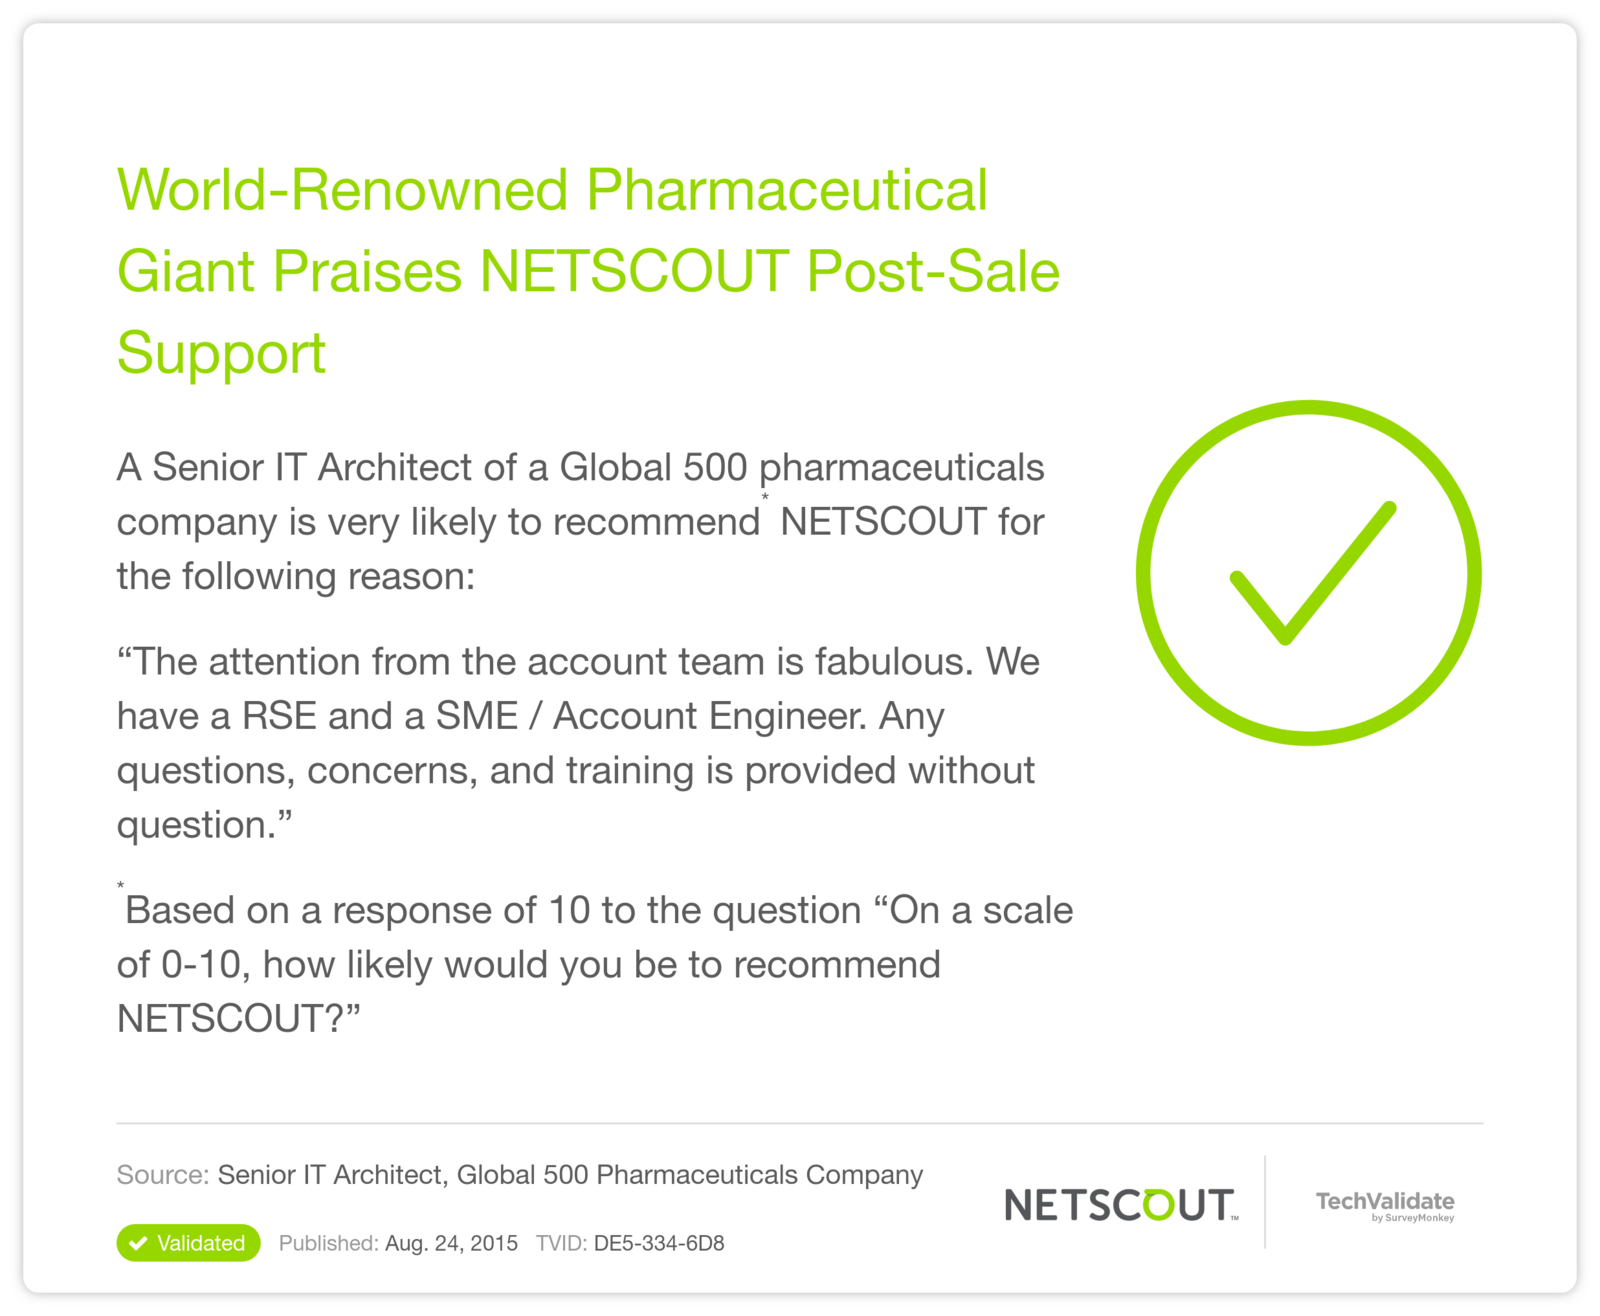 World-Renowned Pharmaceutical Giant Praises NETSCOUT Post-Sale Support